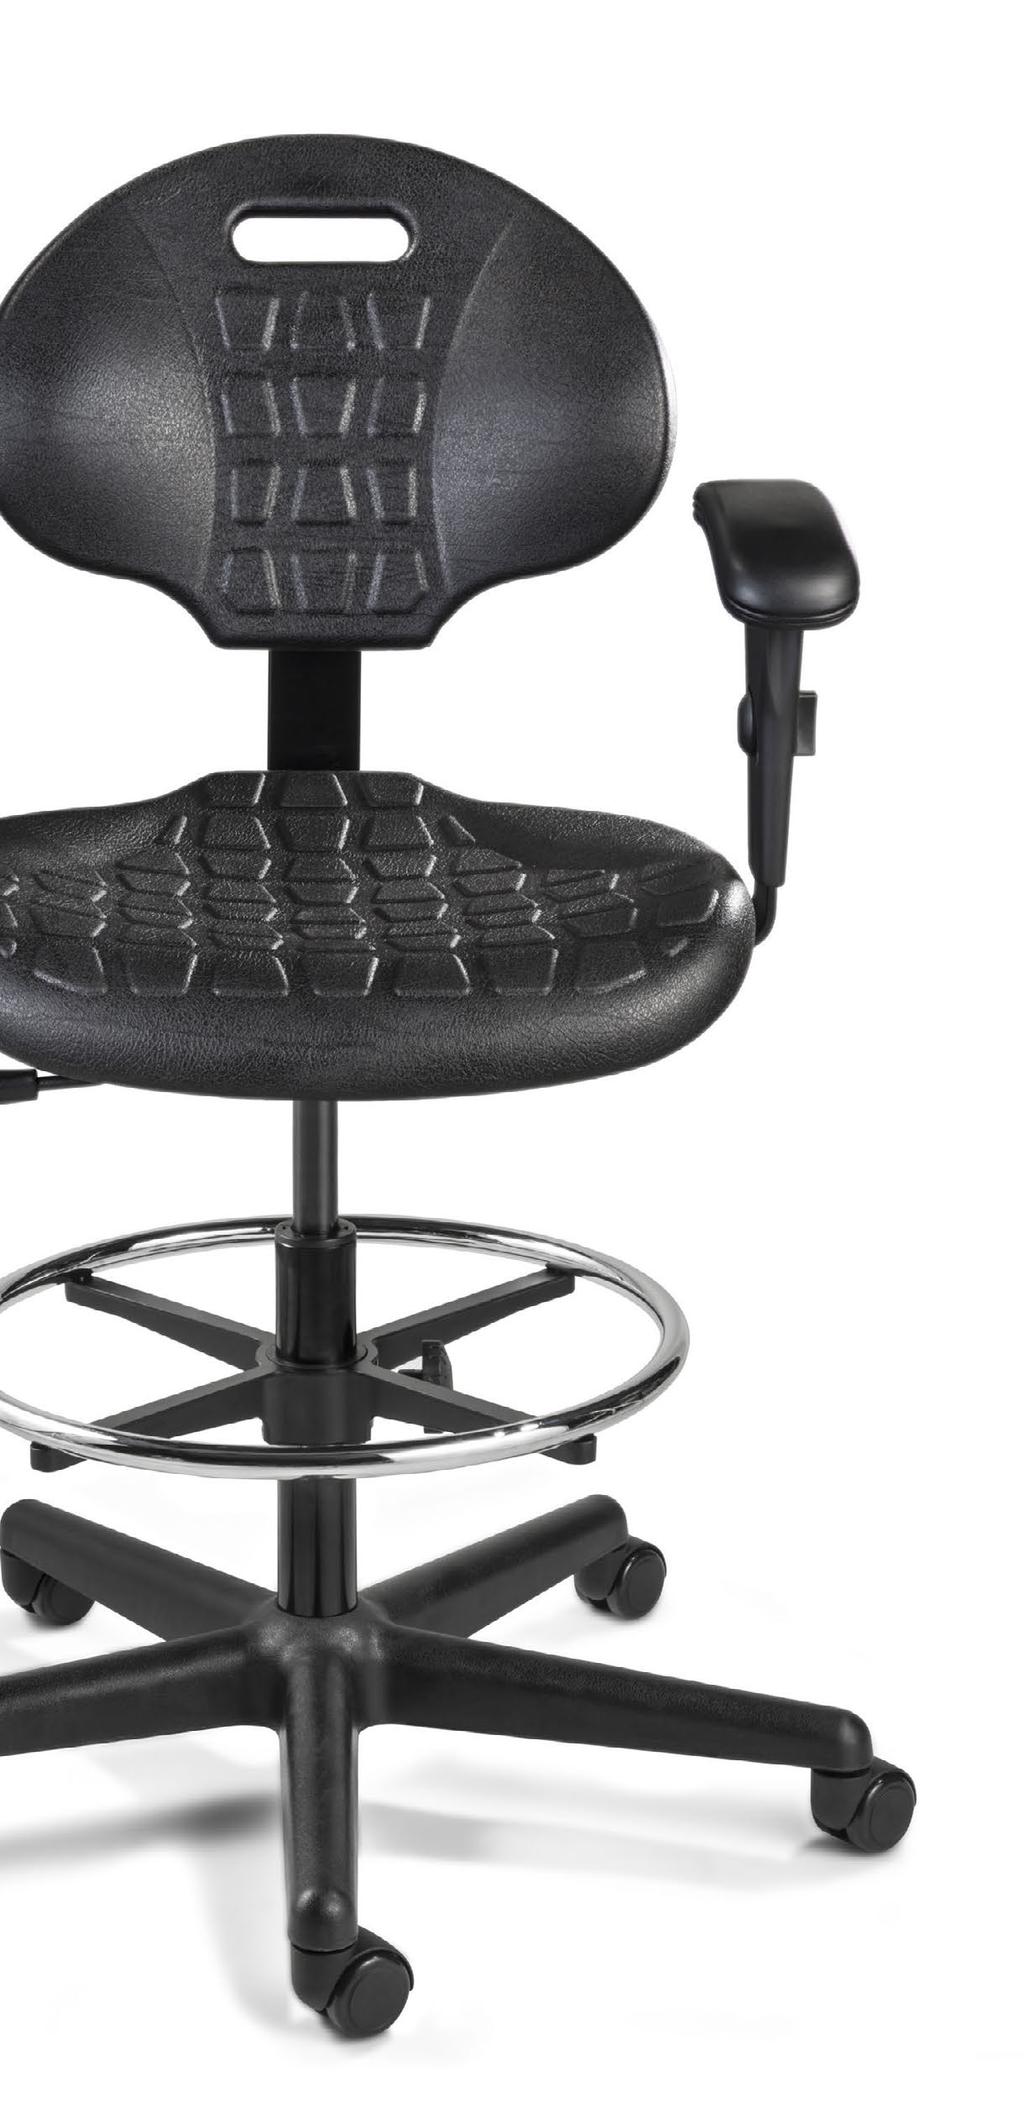 POLYURETHANE CHAIRS 7000 Series EVERLAST SERIES BEVCO s EVERLAST series is specifically designed for outstanding comfort, safety and long-lasting use in the toughest technical